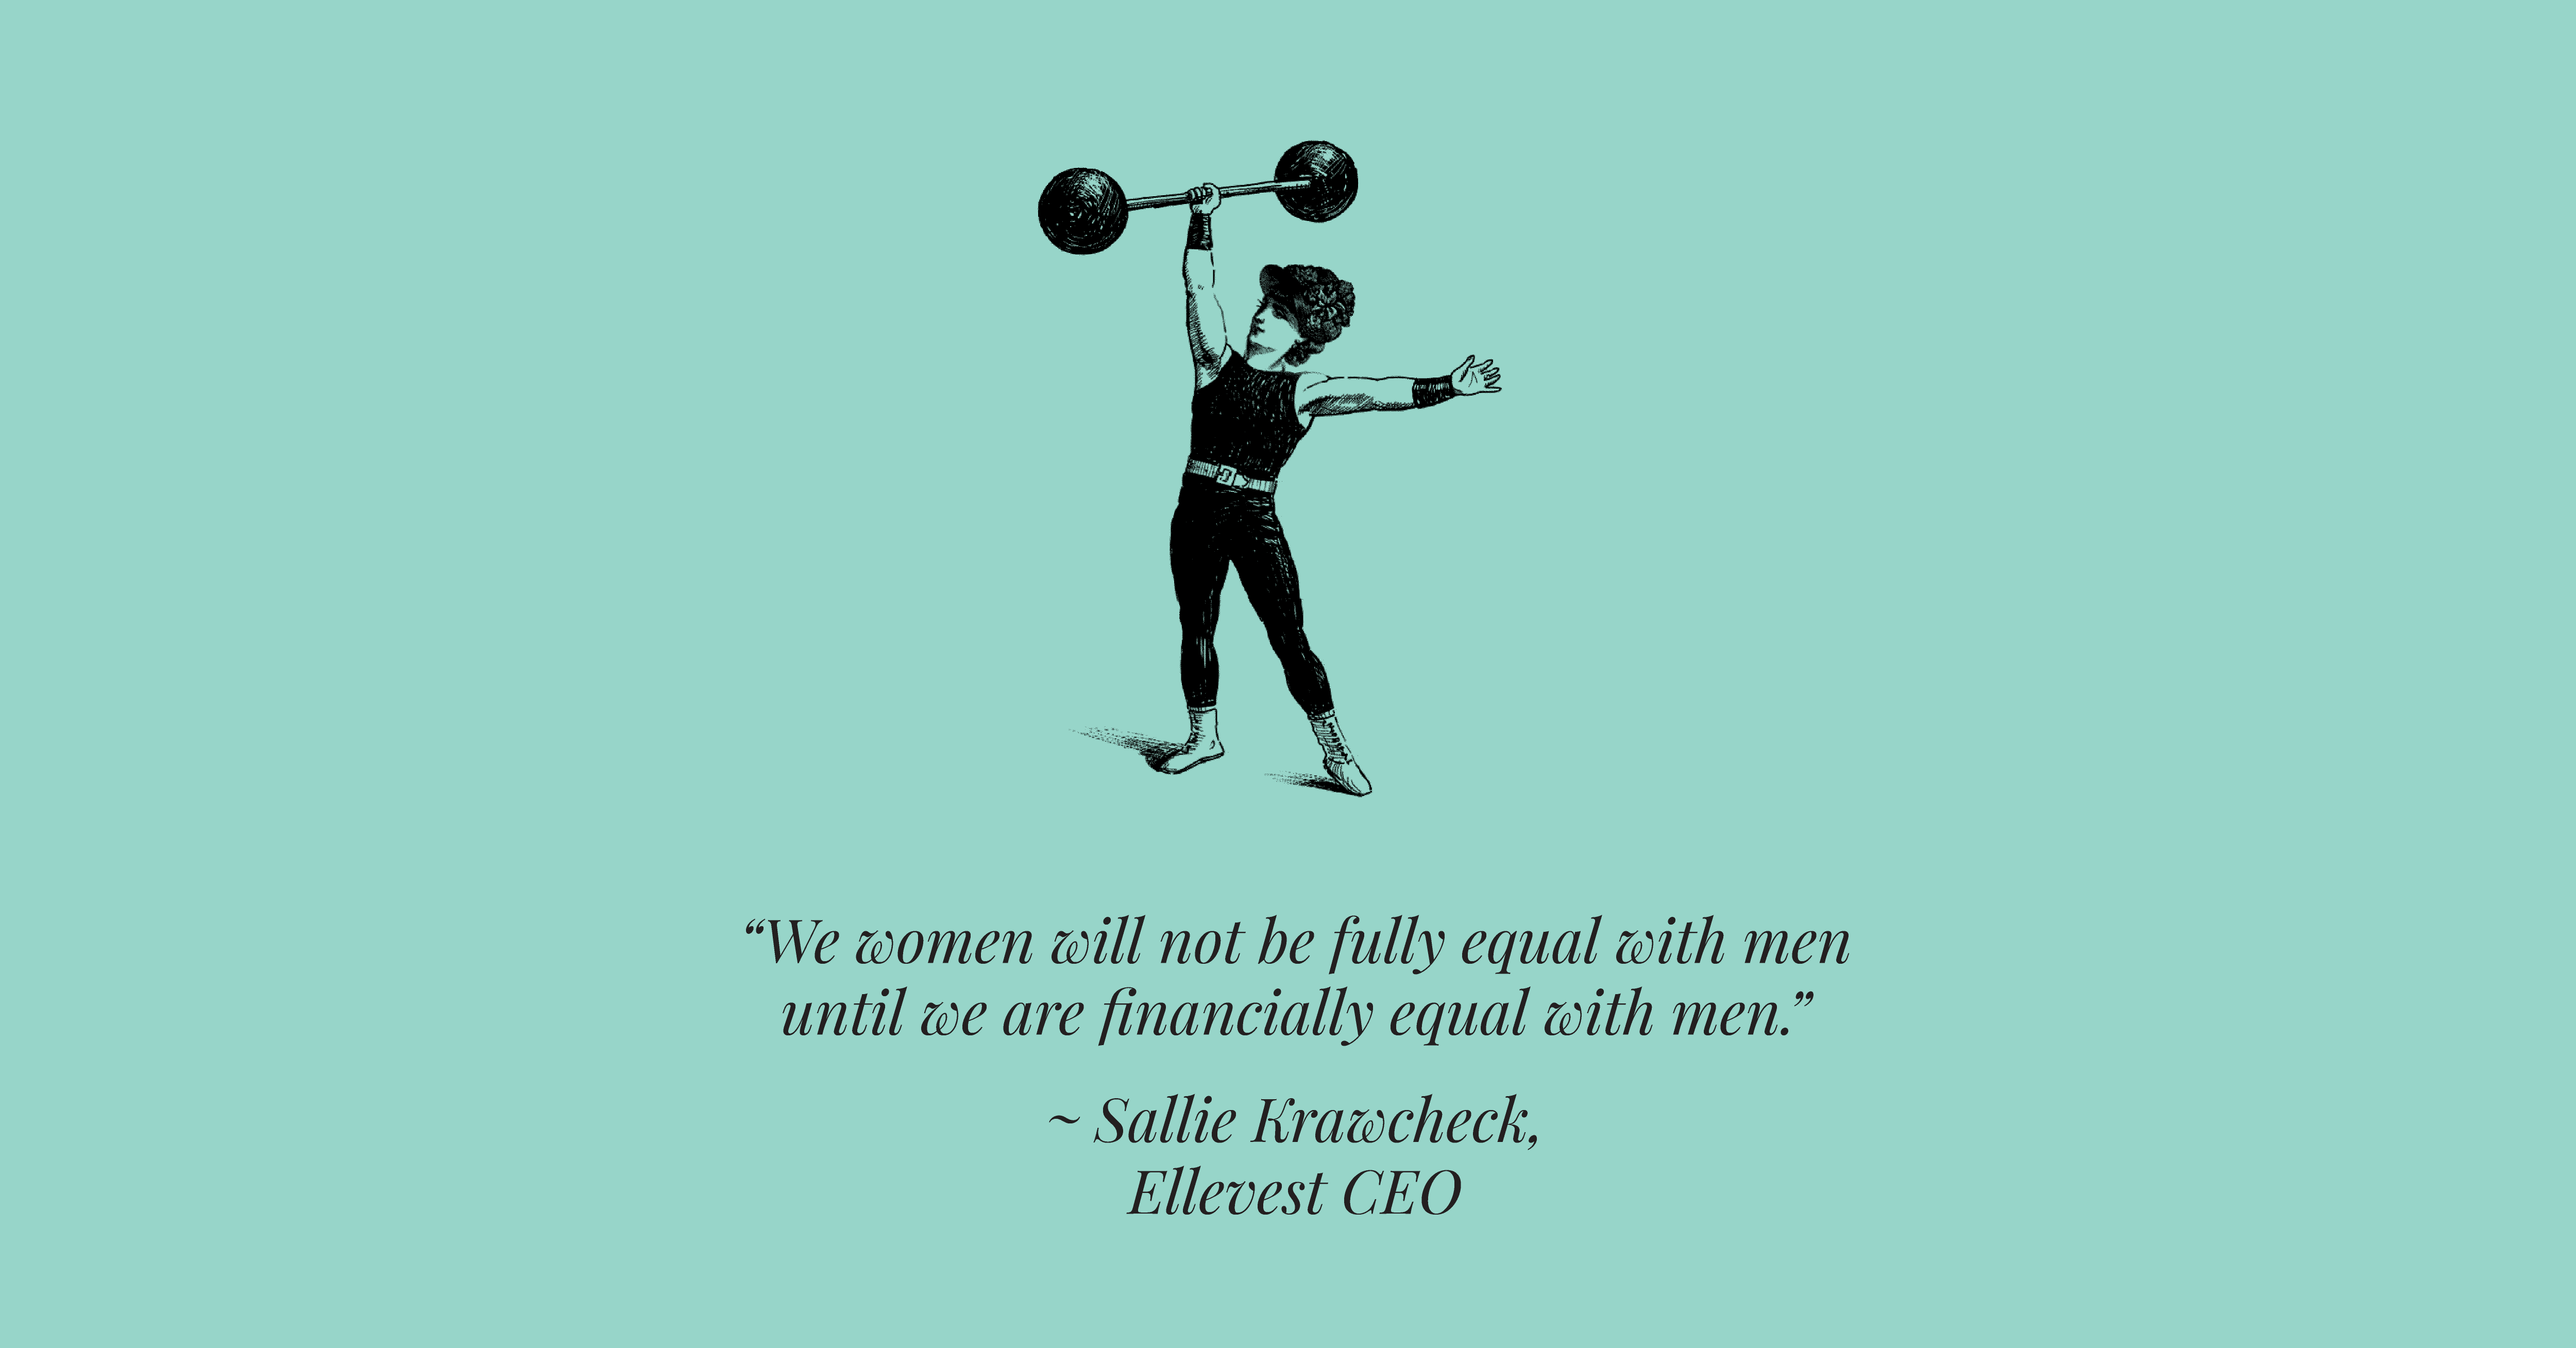 Women Won't Be Equal With Men Until We Are Financially Equal With Men